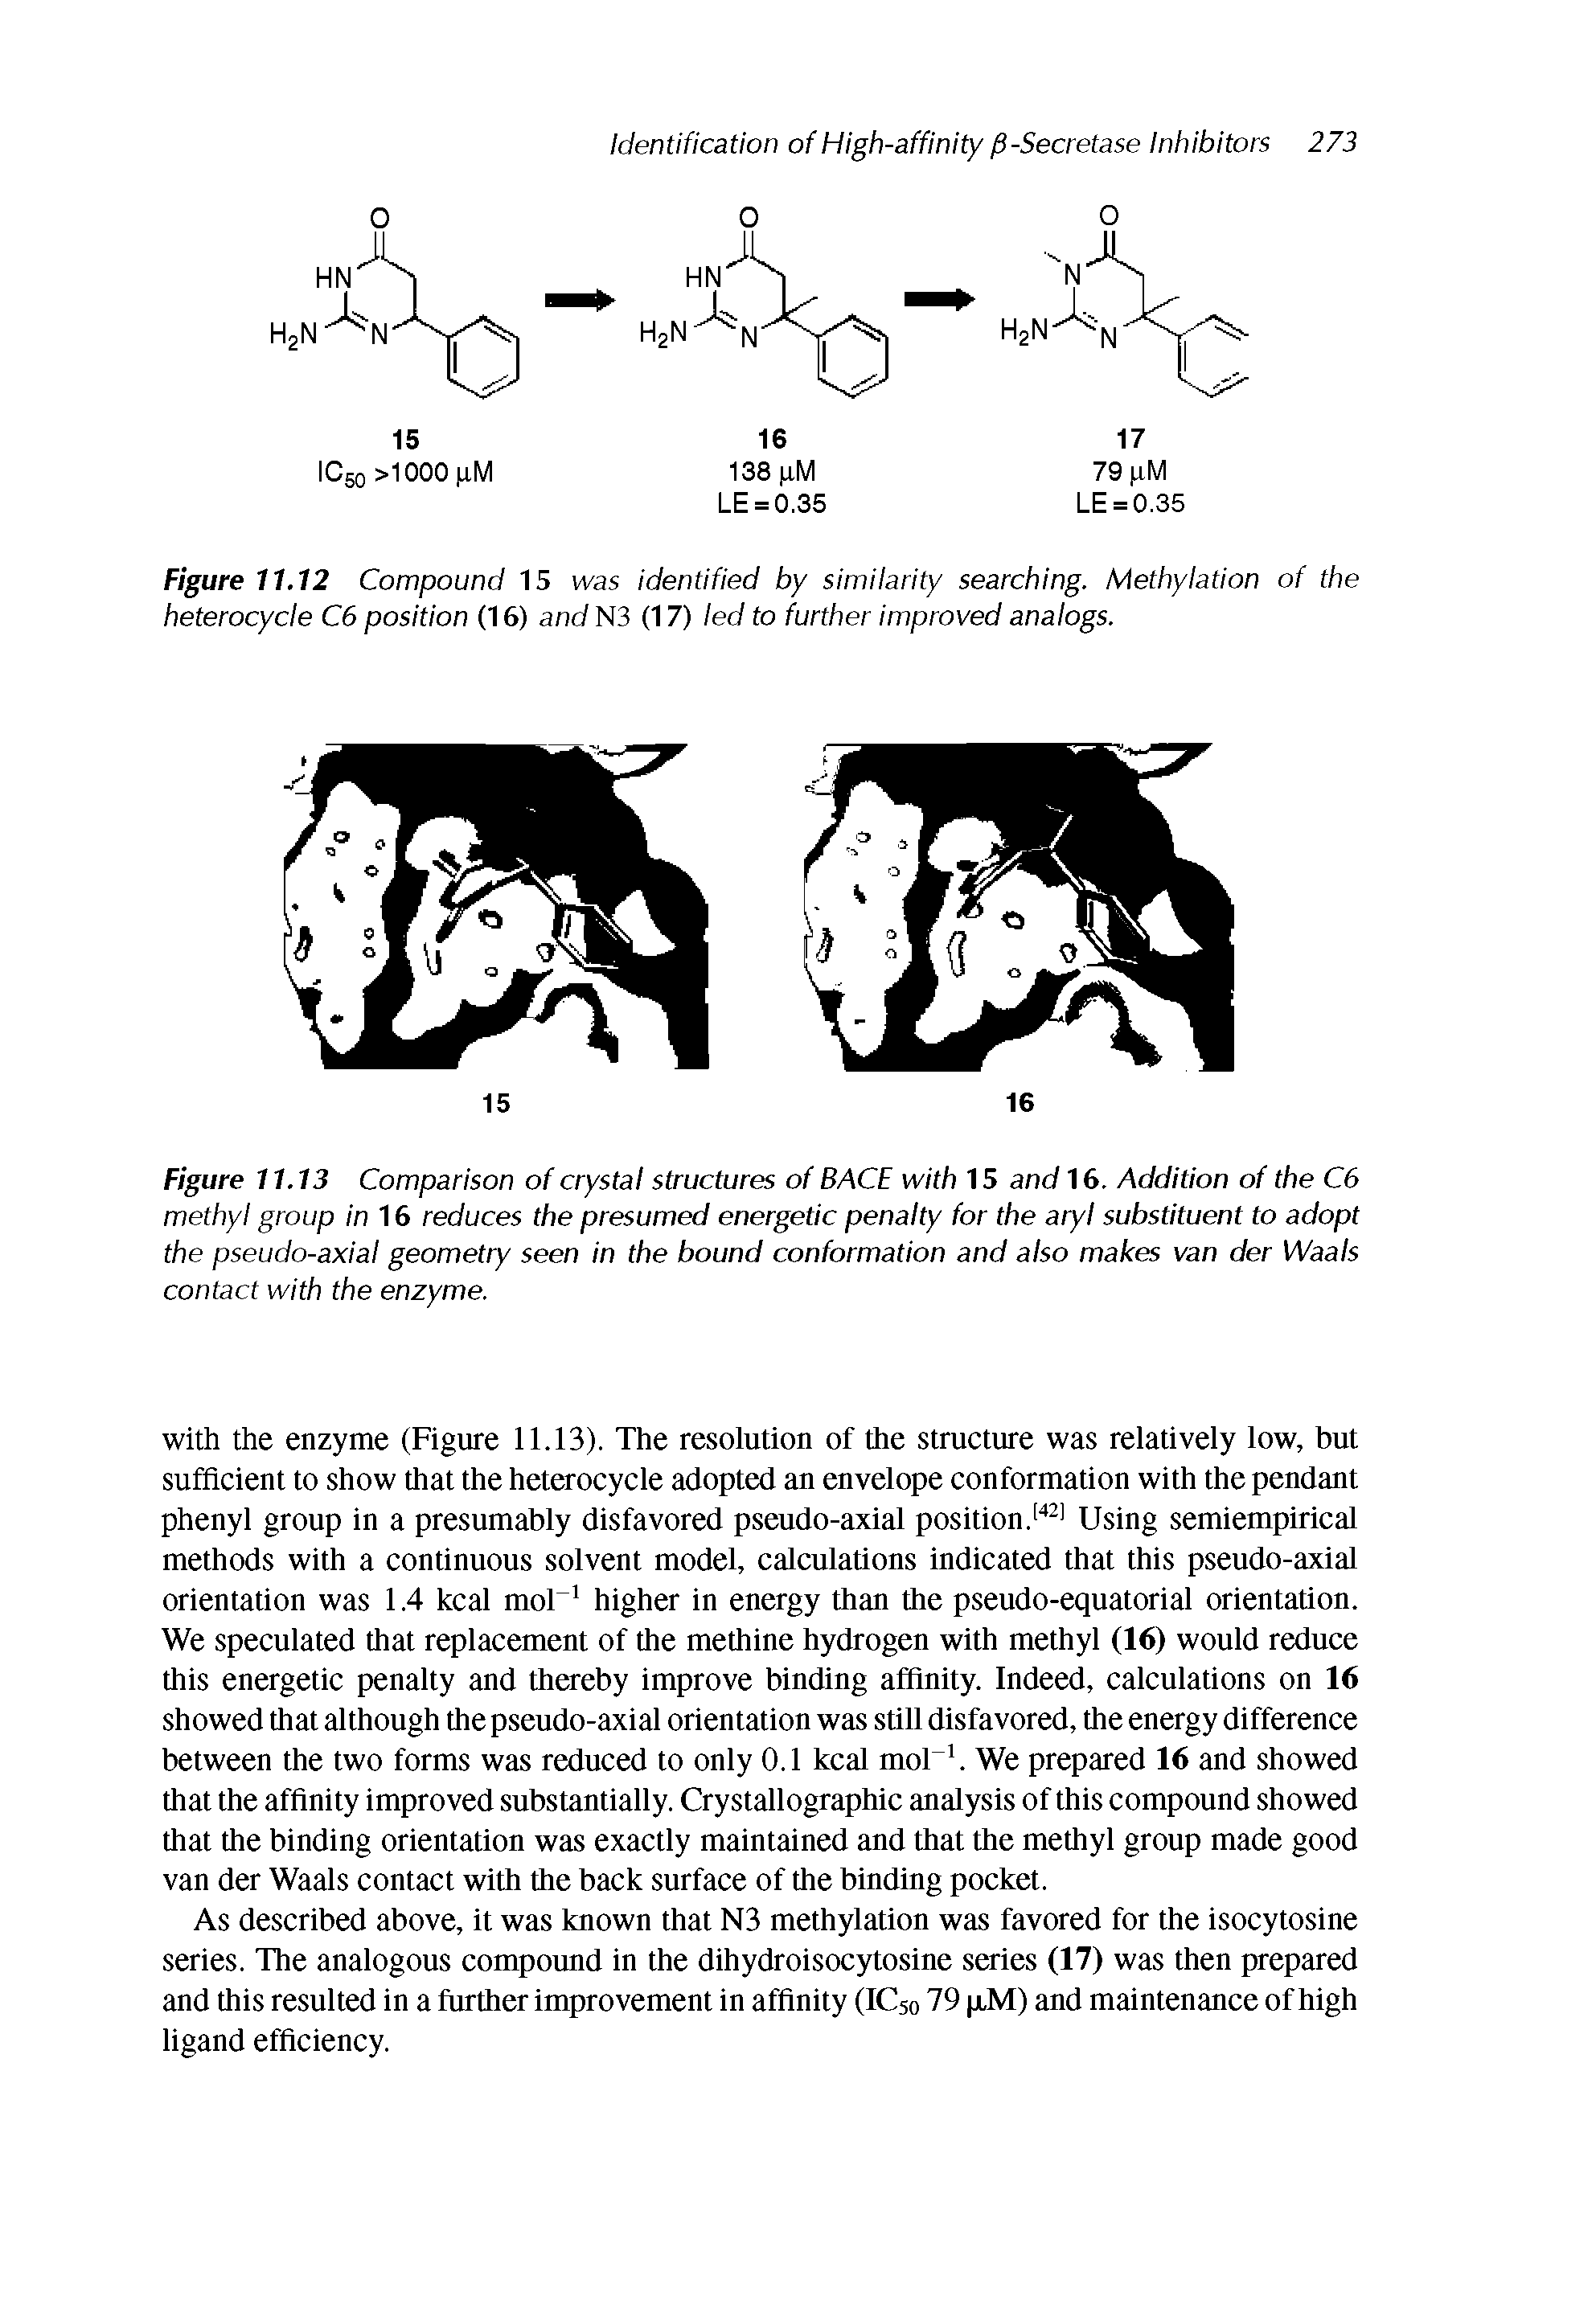 Figure 11.13 Comparison of crystal structures of BACE with 15 and 16. Addition of the C6 methyl group in 16 reduces the presumed energetic penalty for the aryl substituent to adopt the pseudo-axial geometry seen in the bound conformation and also makes van der Waals contact with the enzyme.